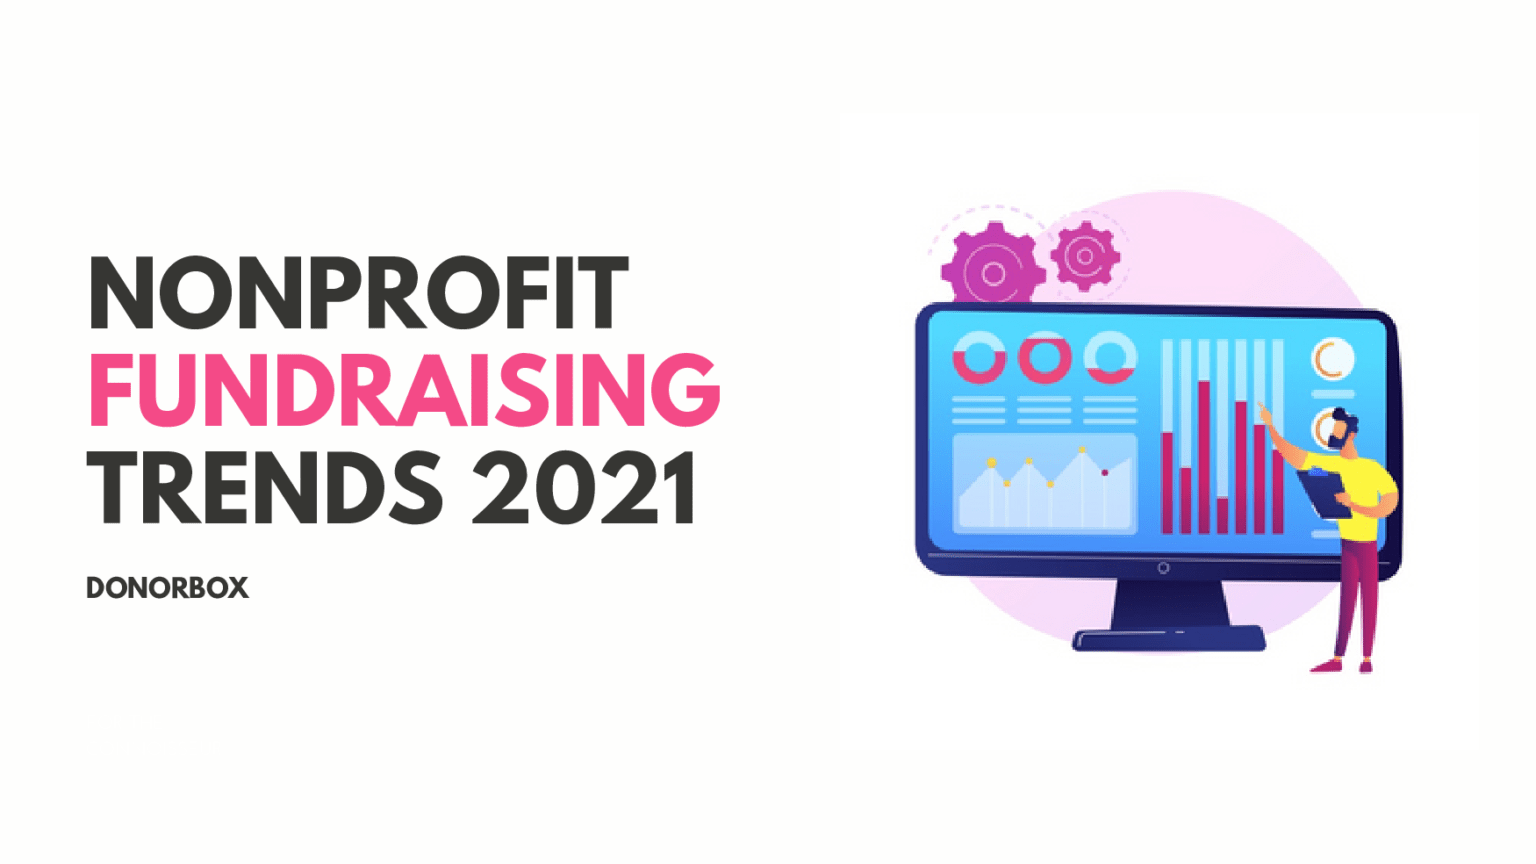 Nonprofit Fundraising Trends 2021 Donorbox